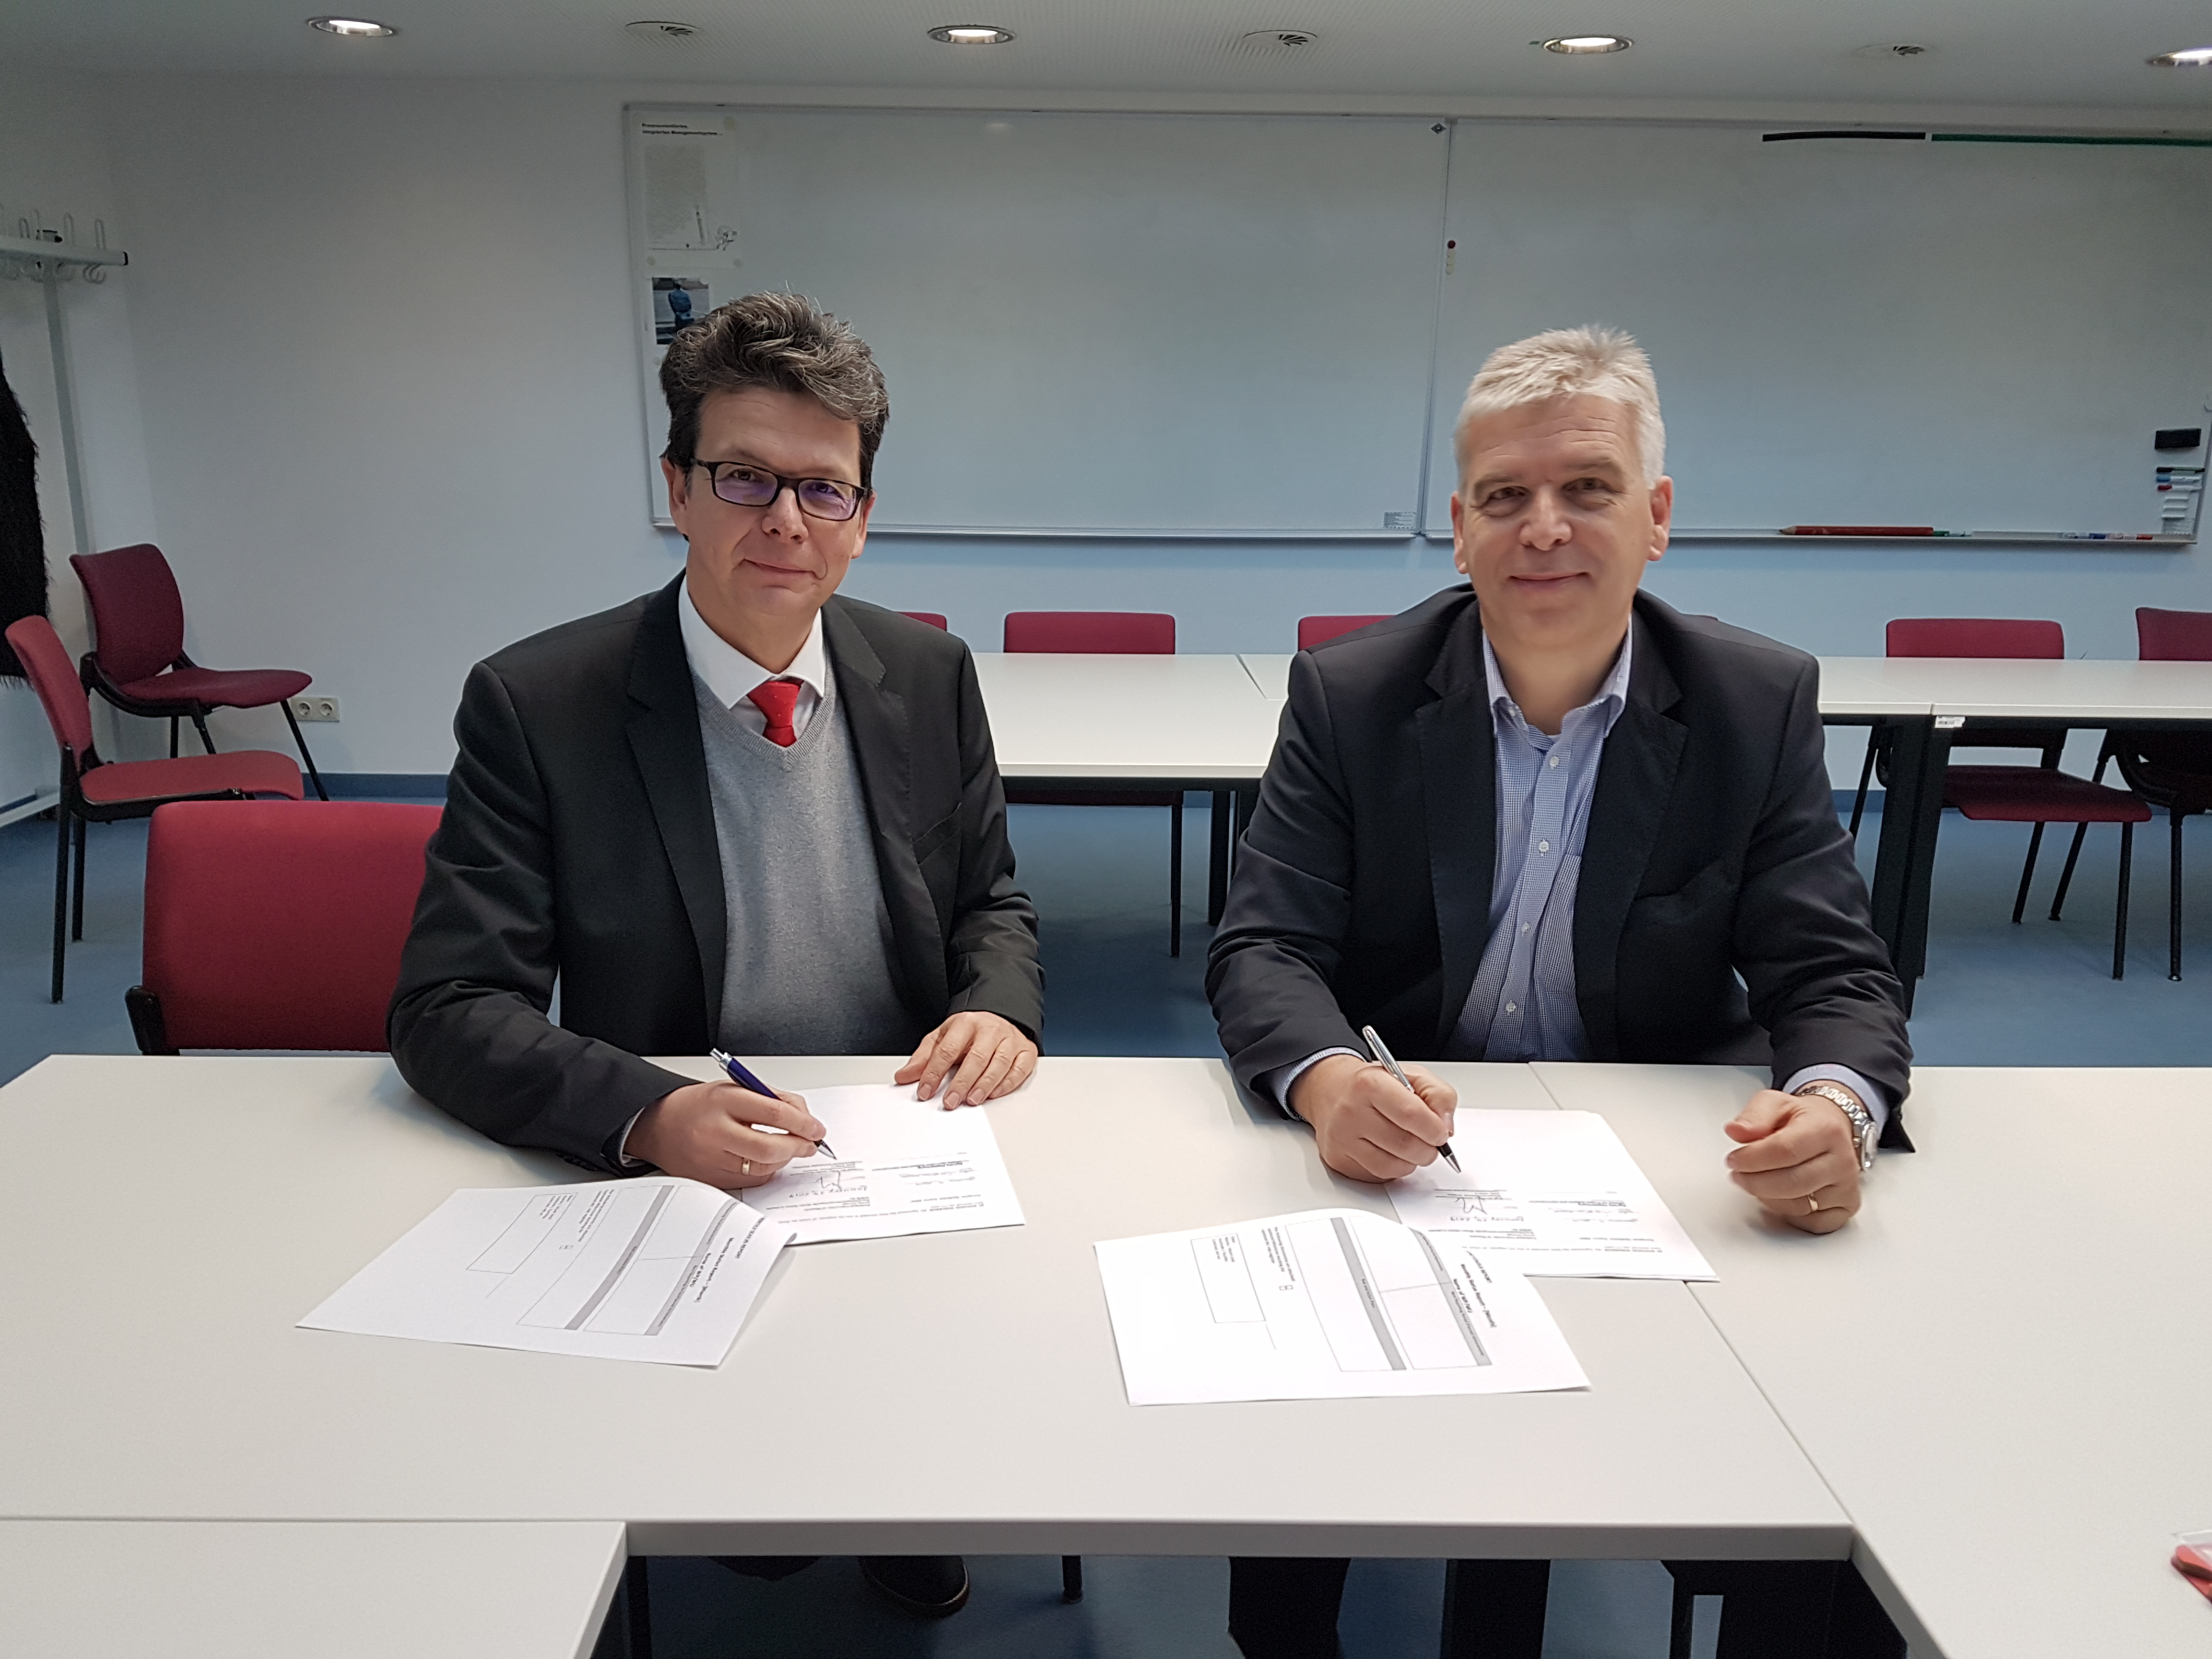 From Garching to Sweden: 15 million euros for the construction of measuring instruments at the European neutron source